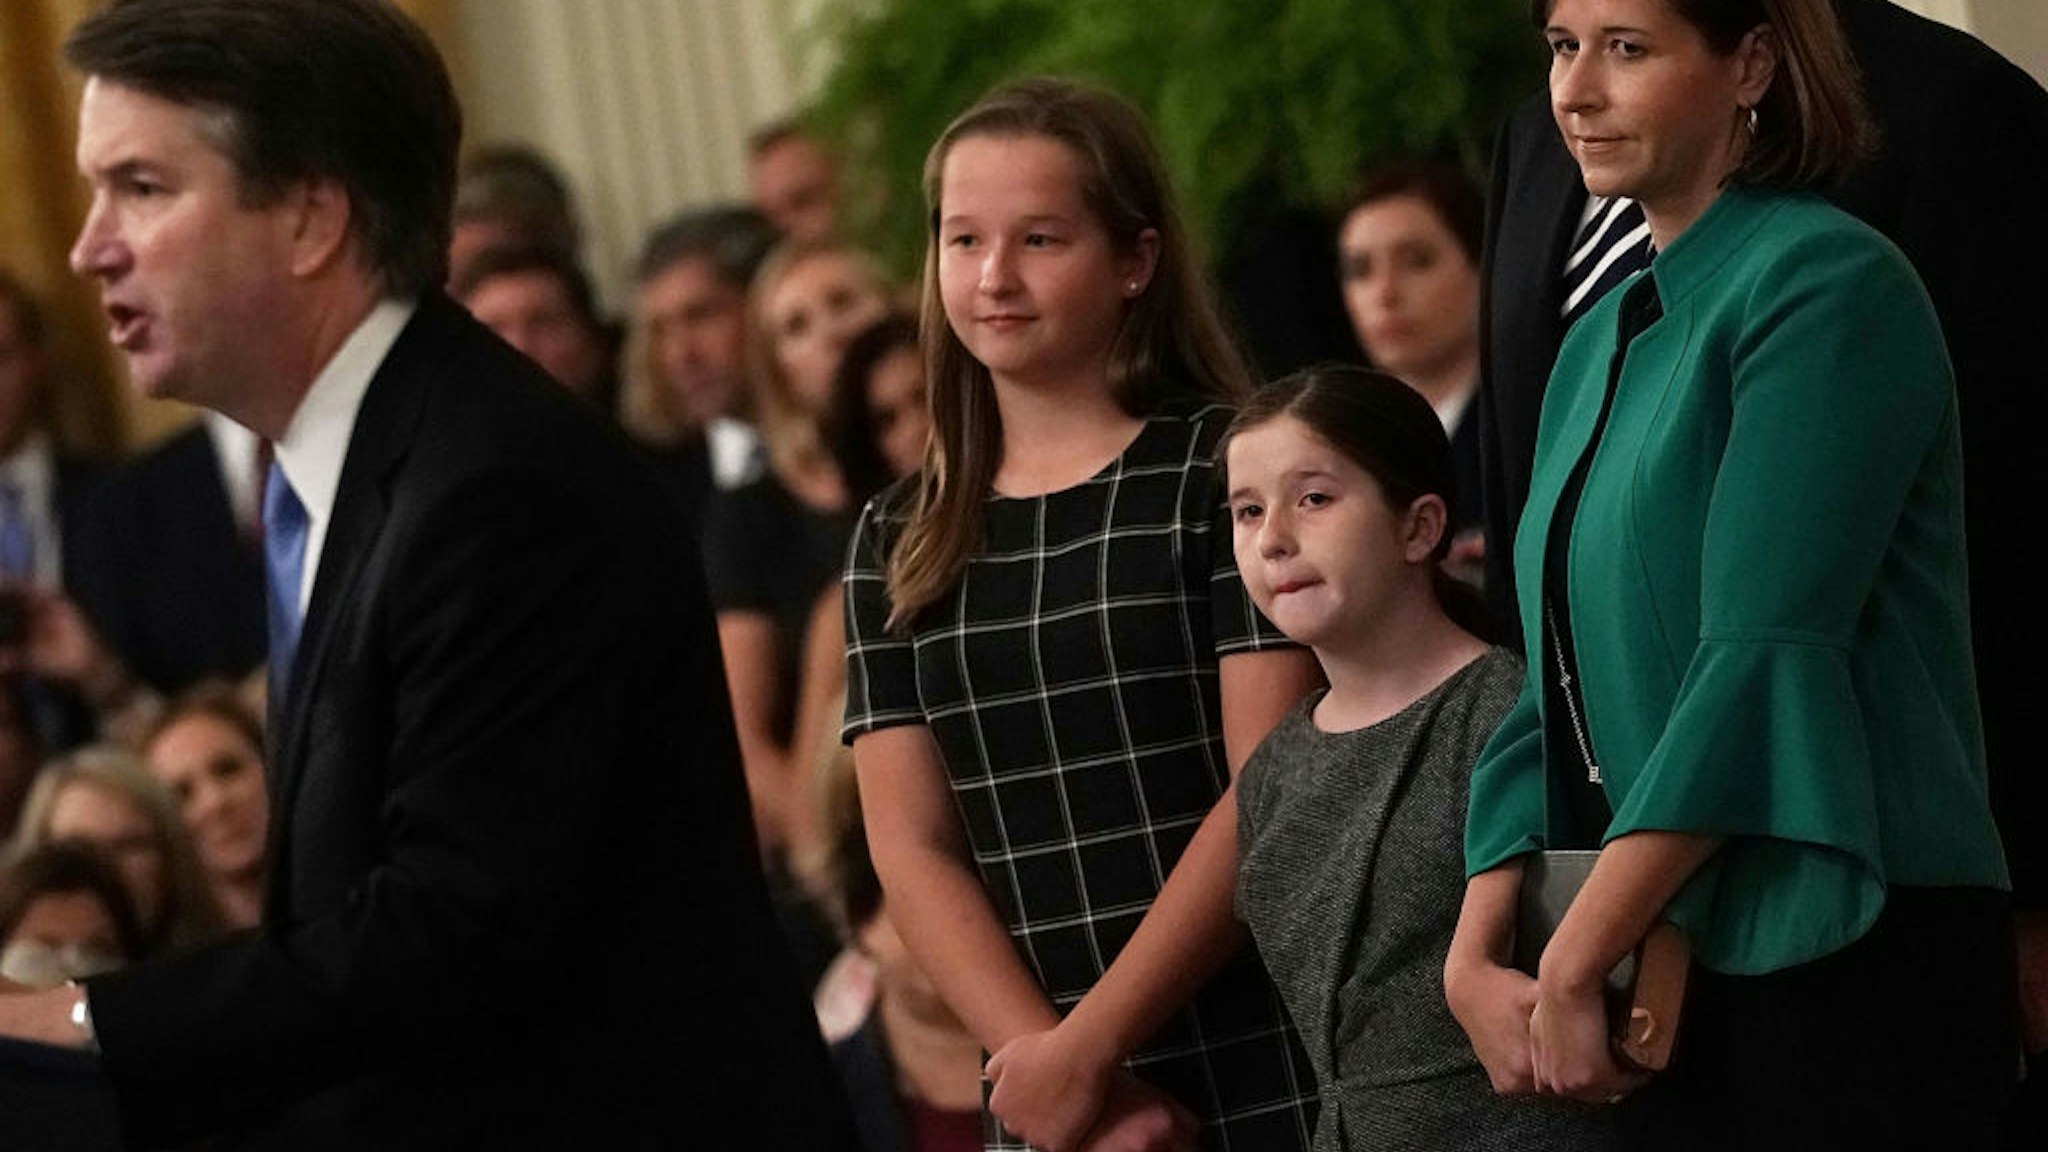 WASHINGTON, DC - OCTOBER 08: U.S. Supreme Court Justice Brett Kavanaugh (L) speaks as his wife Ashley (R), daughters Liza (2nd L) and Margaret (3rd L) look on during a ceremonial swearing in at the East Room of the White House October 08, 2018 in Washington, DC. Kavanaugh was confirmed in the Senate 50-48 after a contentious process that included several women accusing Kavanaugh of sexual assault. Kavanaugh has denied the allegations. (Photo by Alex Wong/Getty Images)